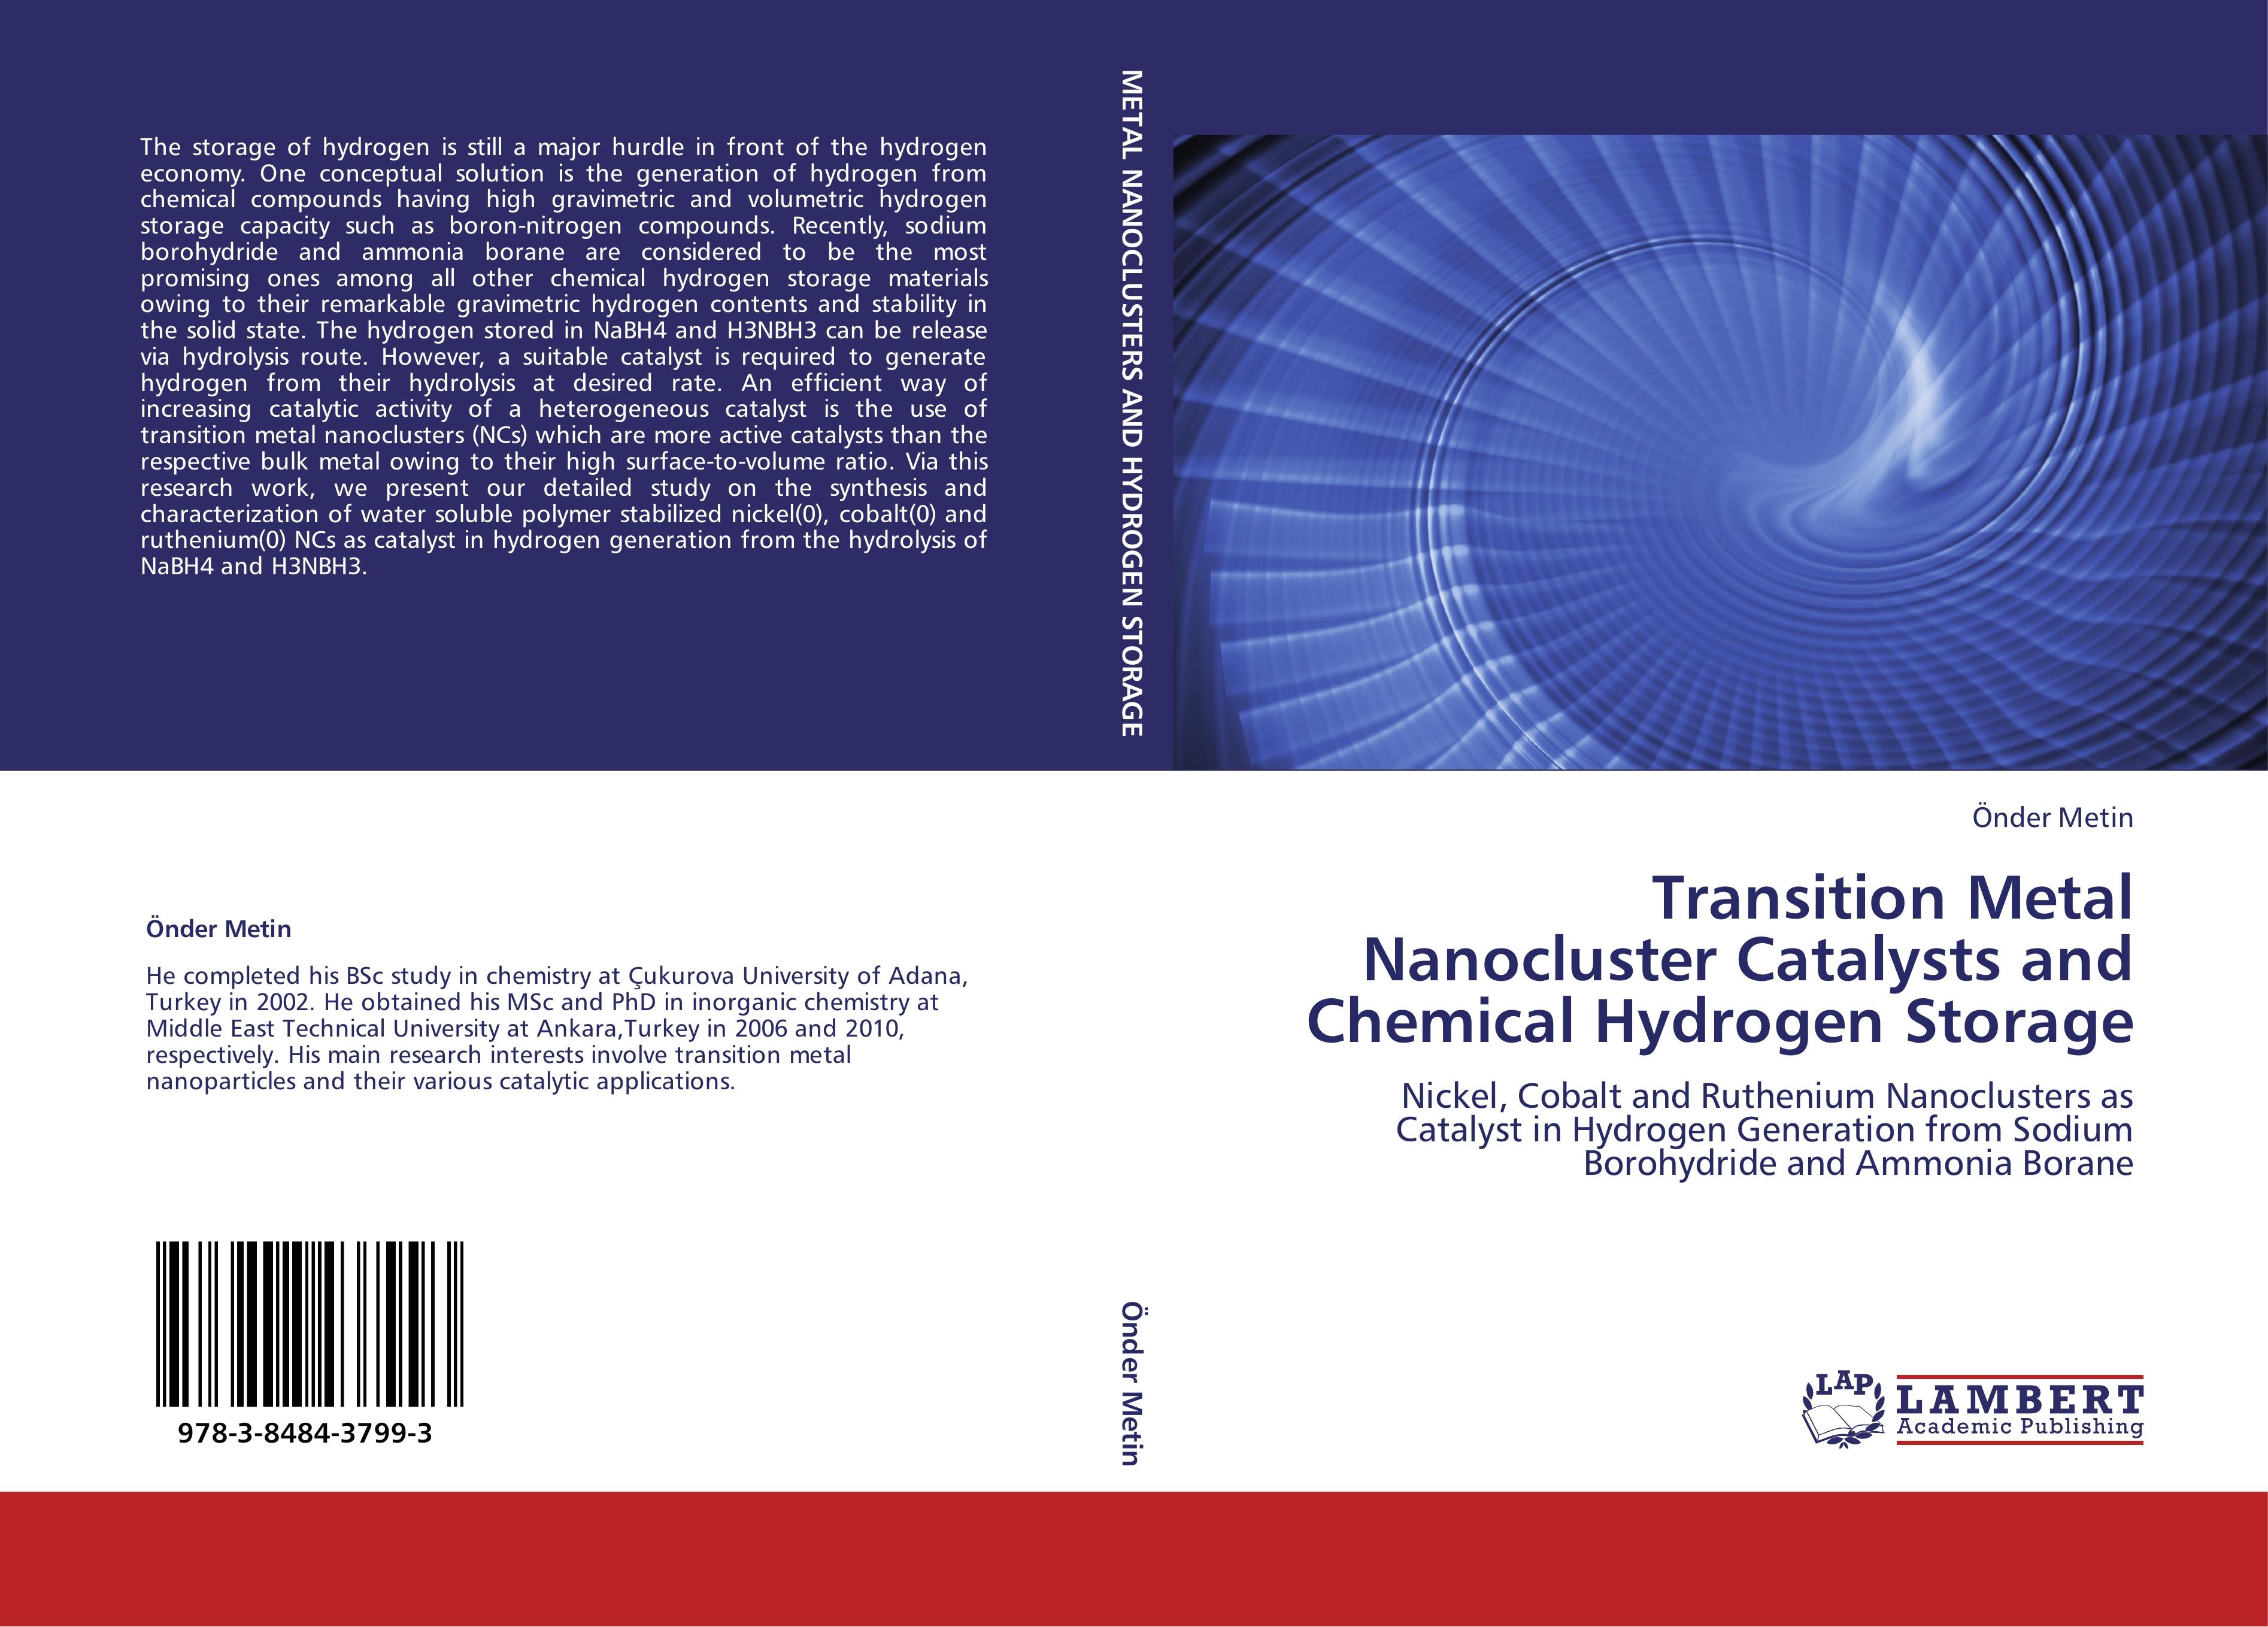 Transition Metal Nanocluster Catalysts and Chemical Hydrogen Storage - Oender Metin